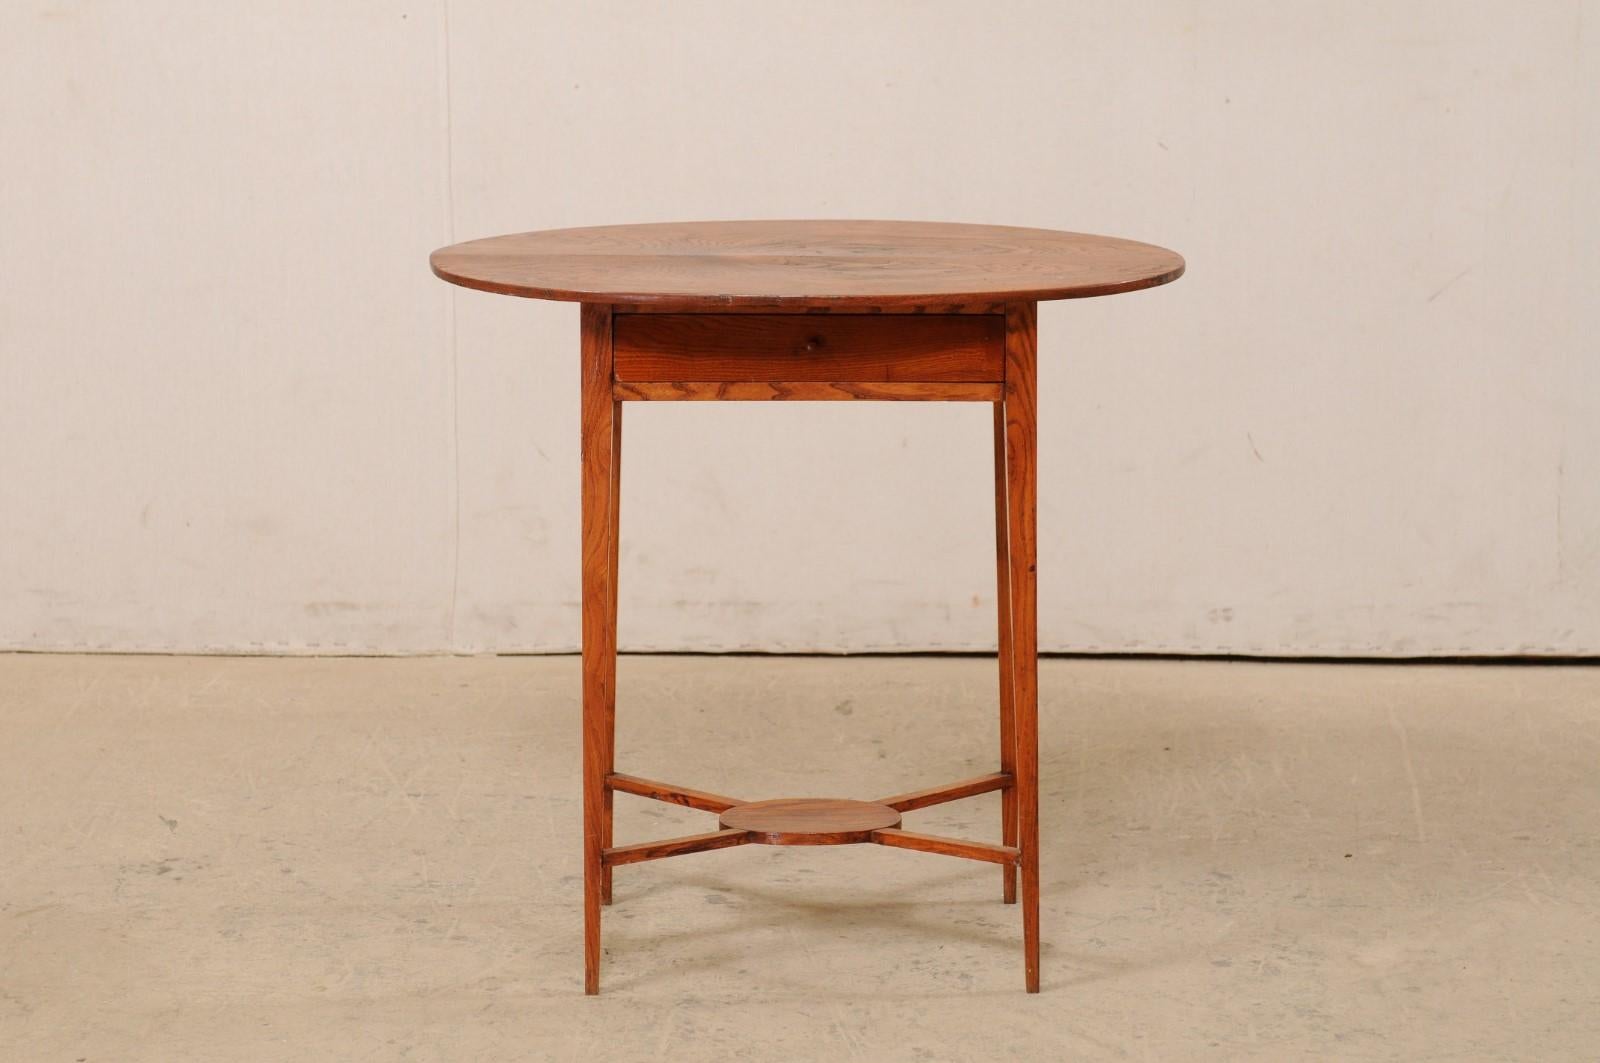 A Swedish oval top, elm wood, side table from the 19th century. This antique table from Sweden, created from Elm wood, features an oval-shaped top, with a cleanly designed apron beneath which houses a single drawer (fitted with wood knob pull) at